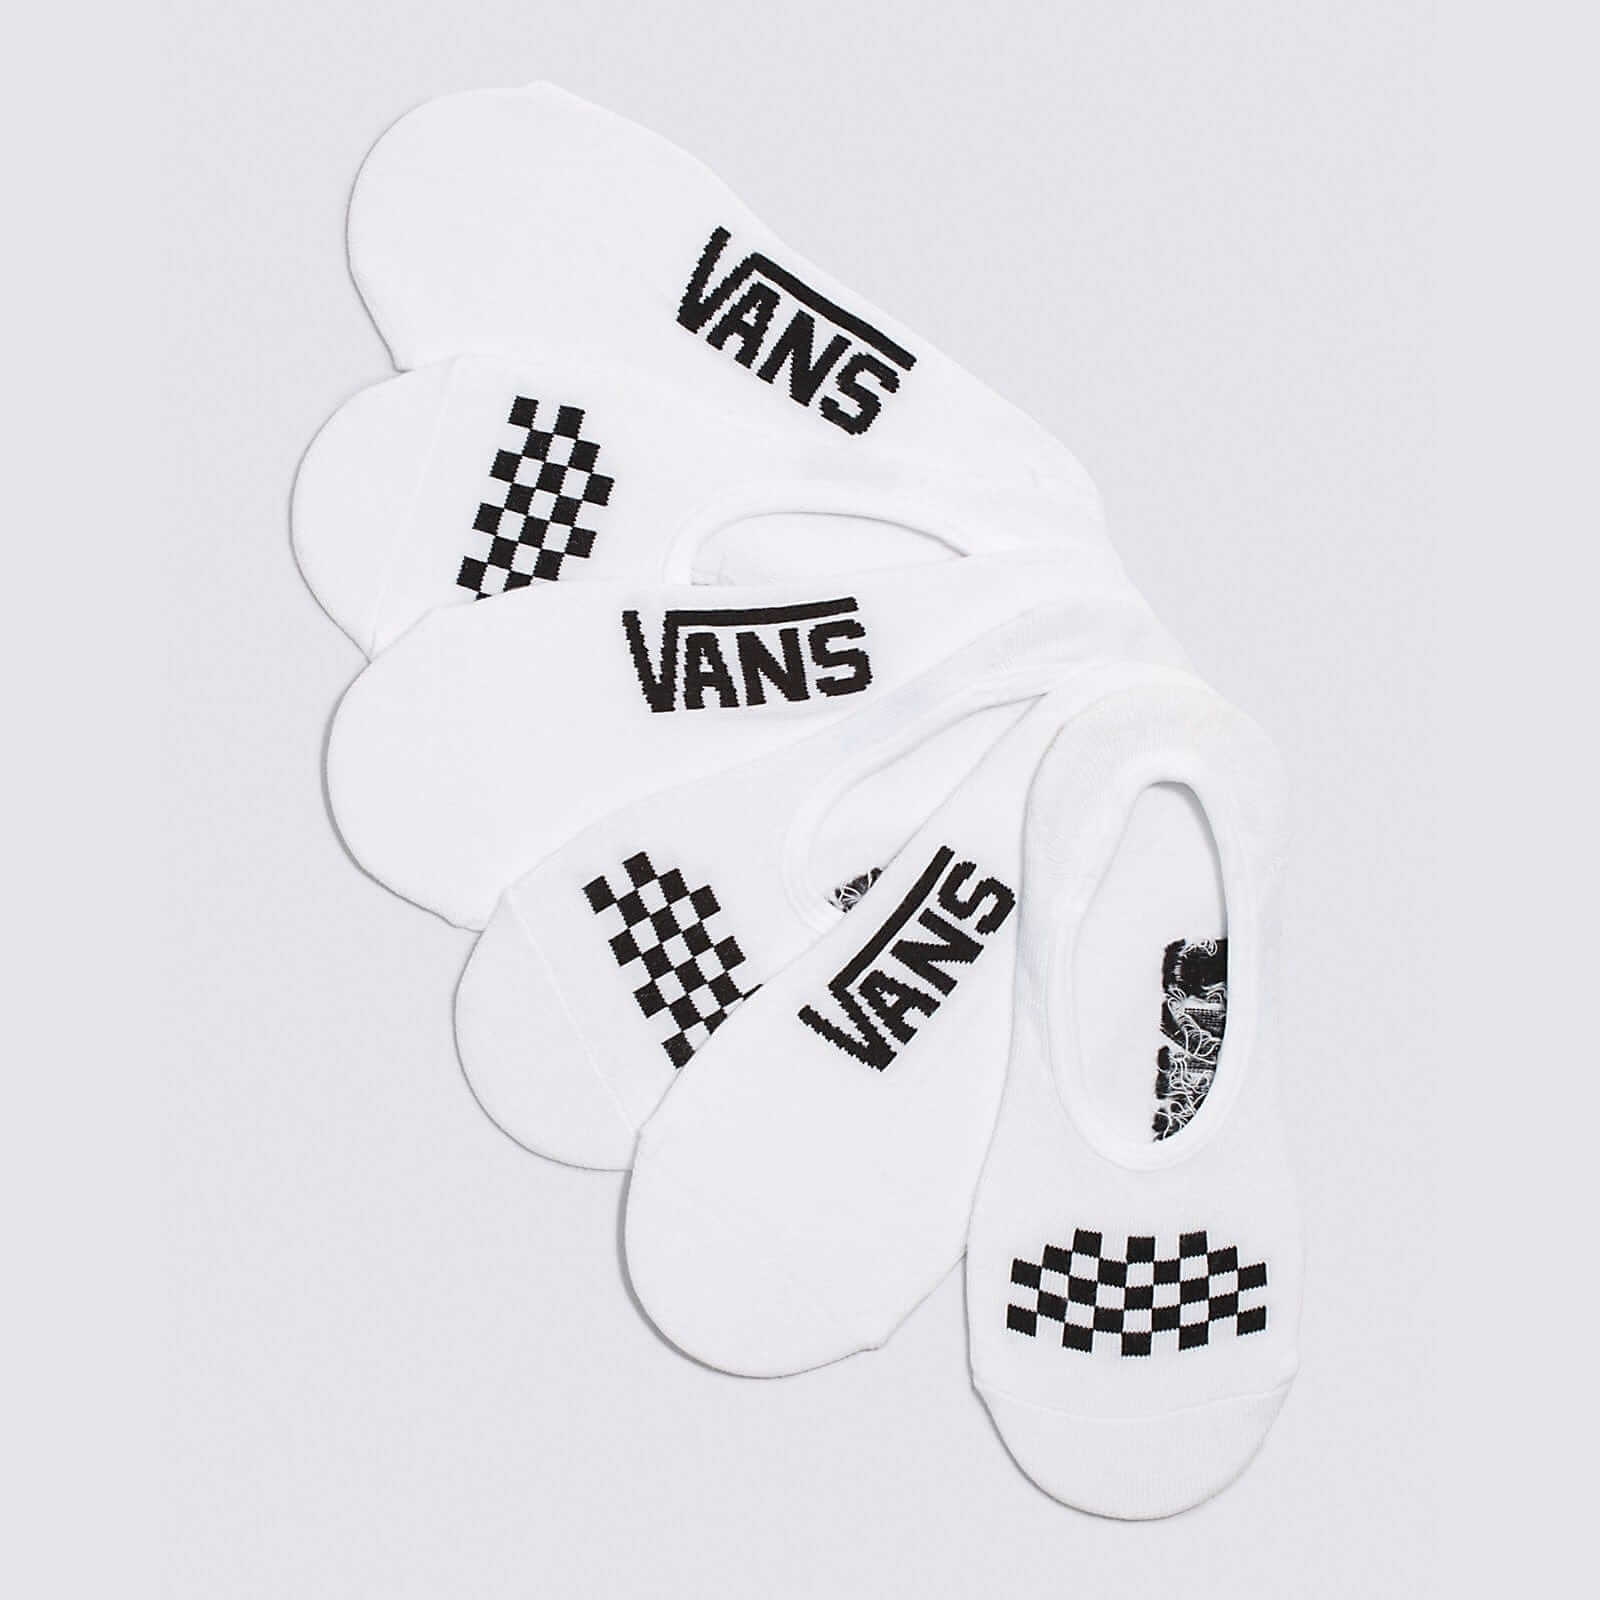 VANS Apparel & Accessories Classic White/Black VANS "Off The Wall", 3 Pack Sock